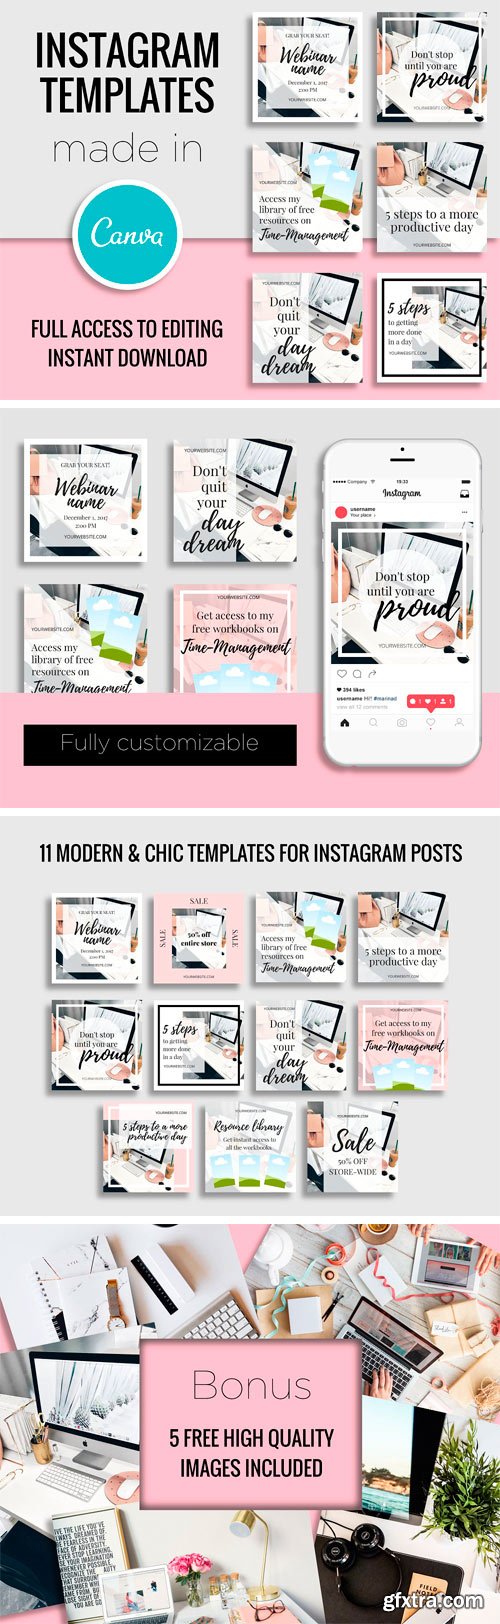 CM - Instagram Templates Made In Canva 2165230